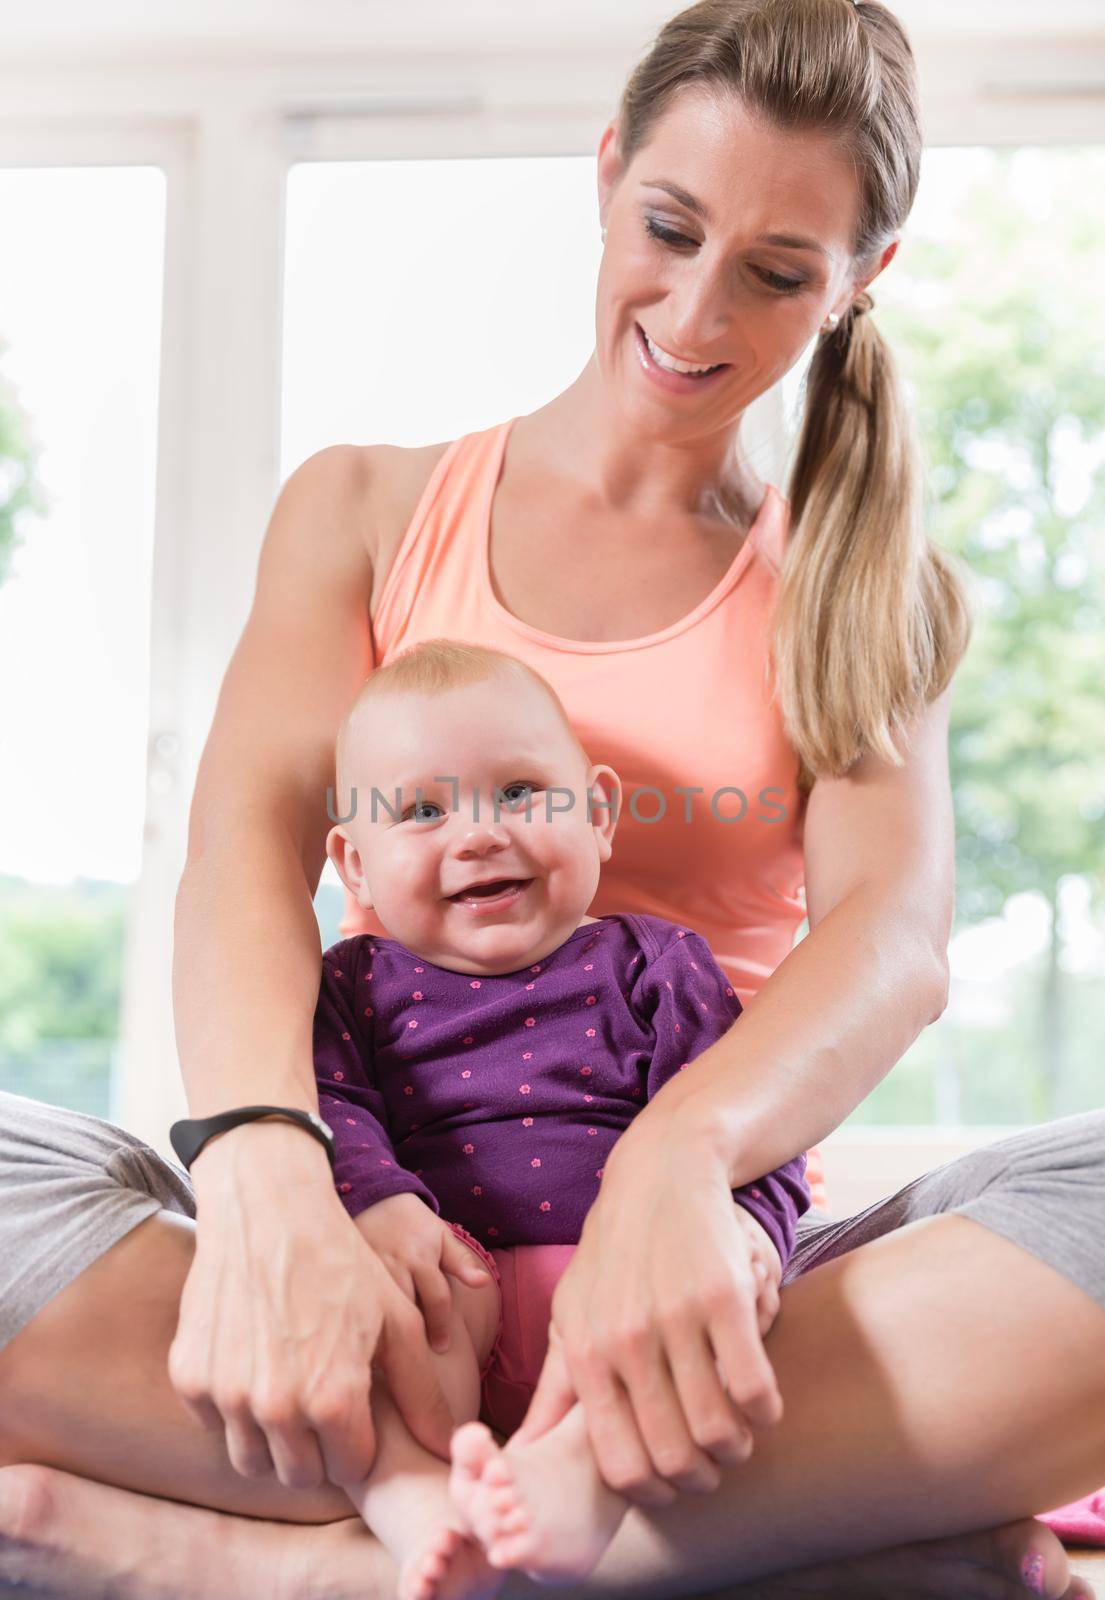 Mum and her baby child in pregnancy recovery course by Kzenon